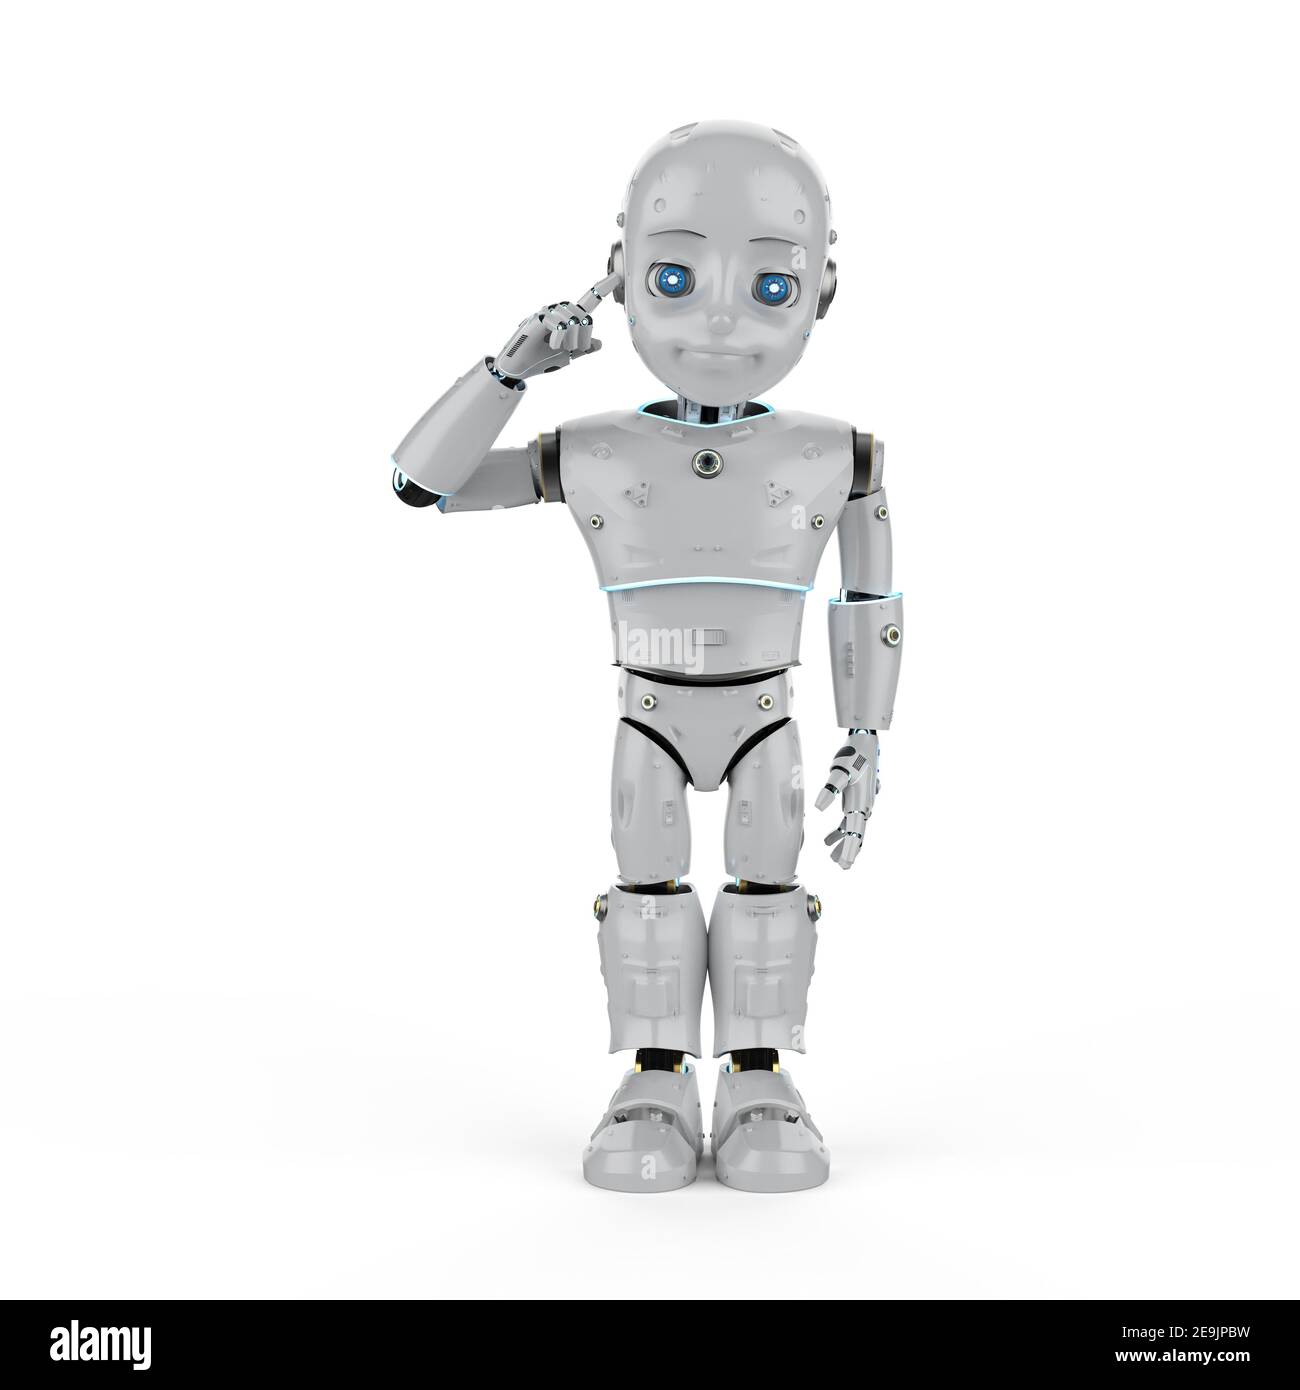 Buy Robotboy Characters Book Online at Low Prices in India